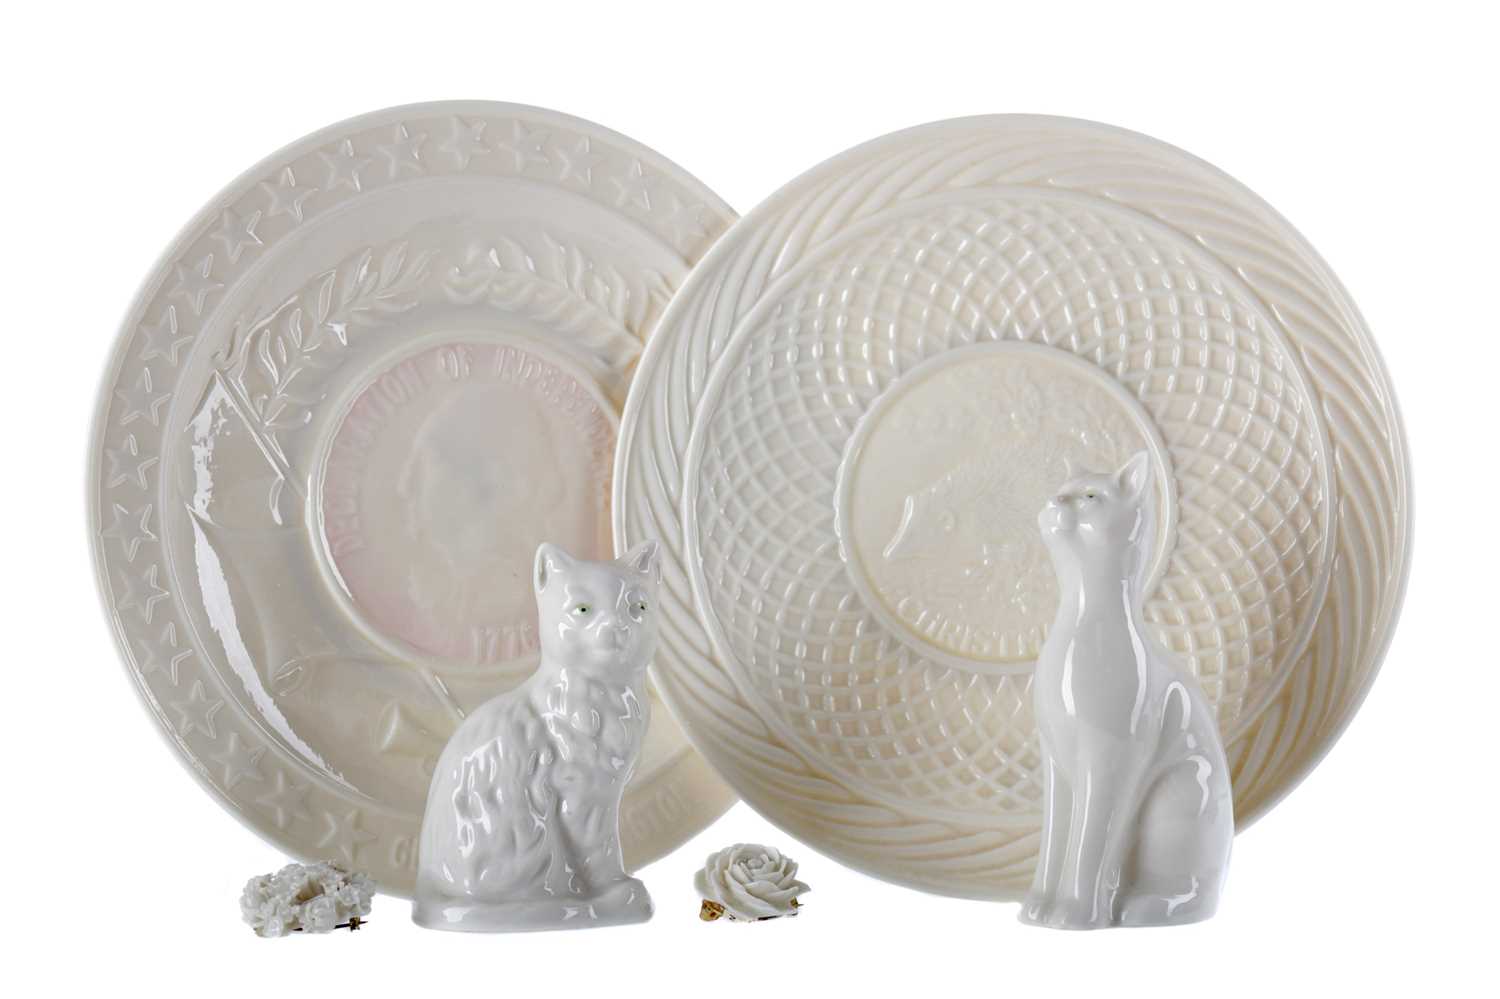 Lot 1106 - A LOT OF THREE BELLEEK PLATES ALONG WITH A LITHOPHANE, TWO CATS AND TWO BROOCHES